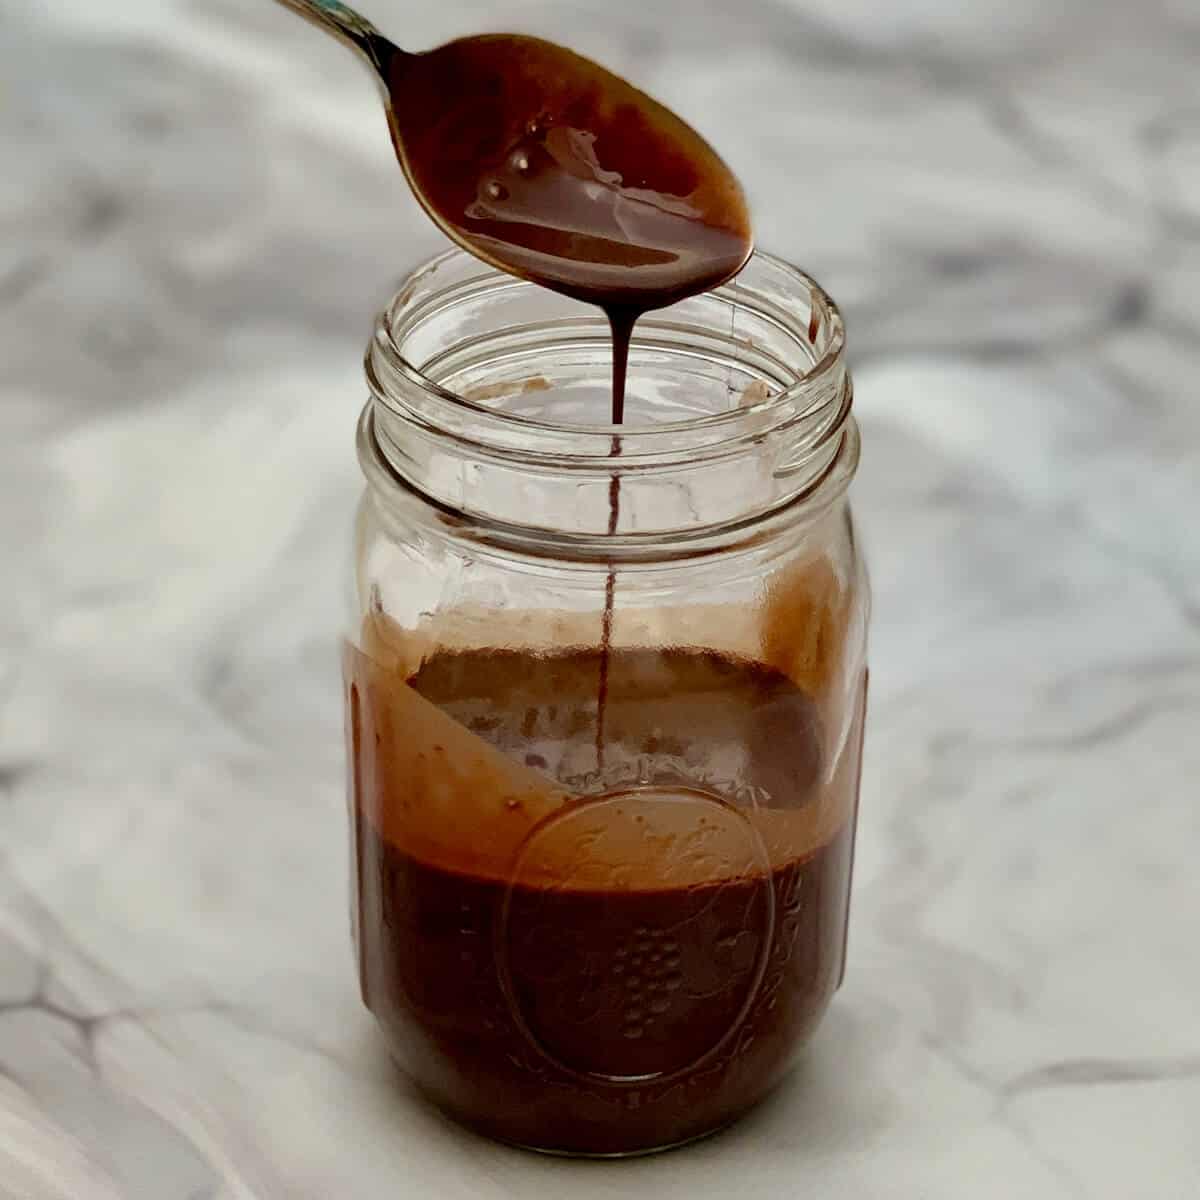 Chocolate syrup dripping from spoon into a jar.